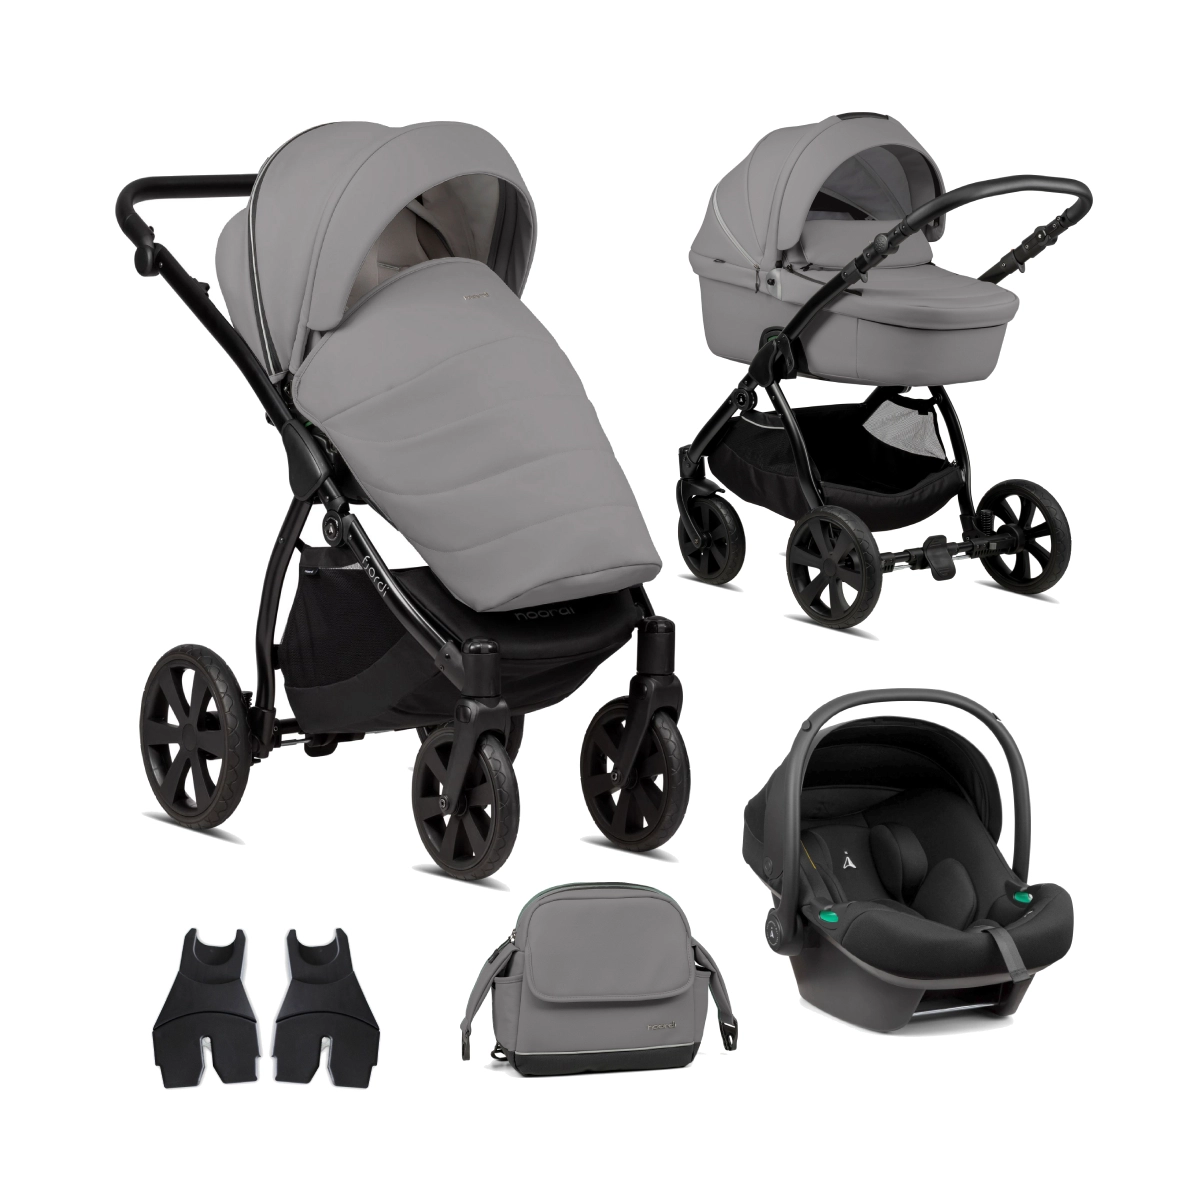 Noordi Fjordi Leather 3in1 Travel System with Terra i-Size Car Seat